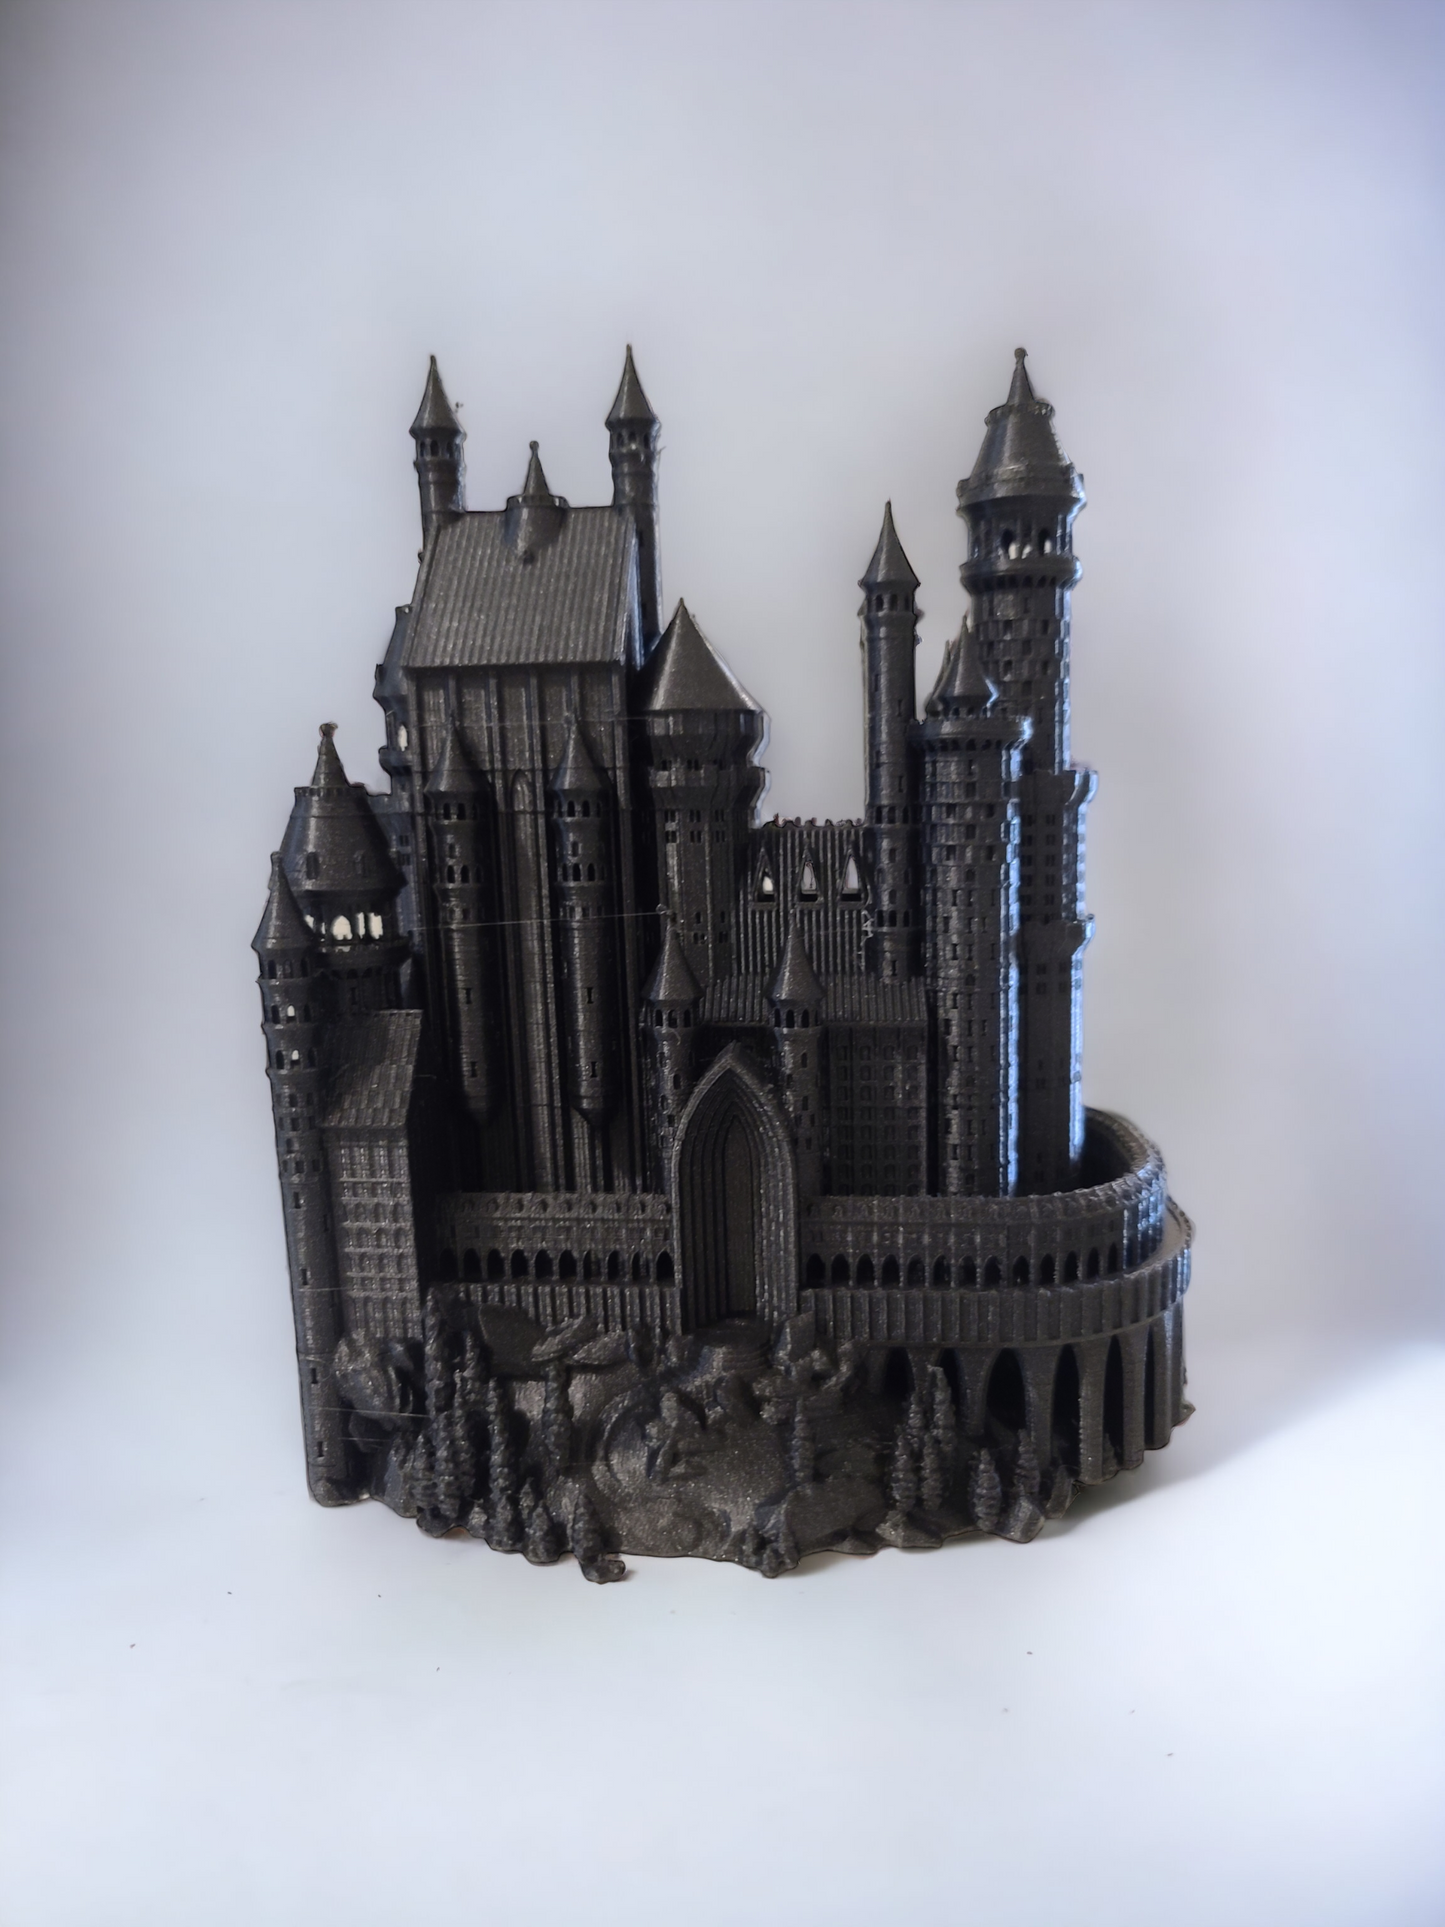 3d print Castle, 3d print architecture, school project, Fairytale gift for her,  Royal figurine, King and Queen decor, history teacher gift